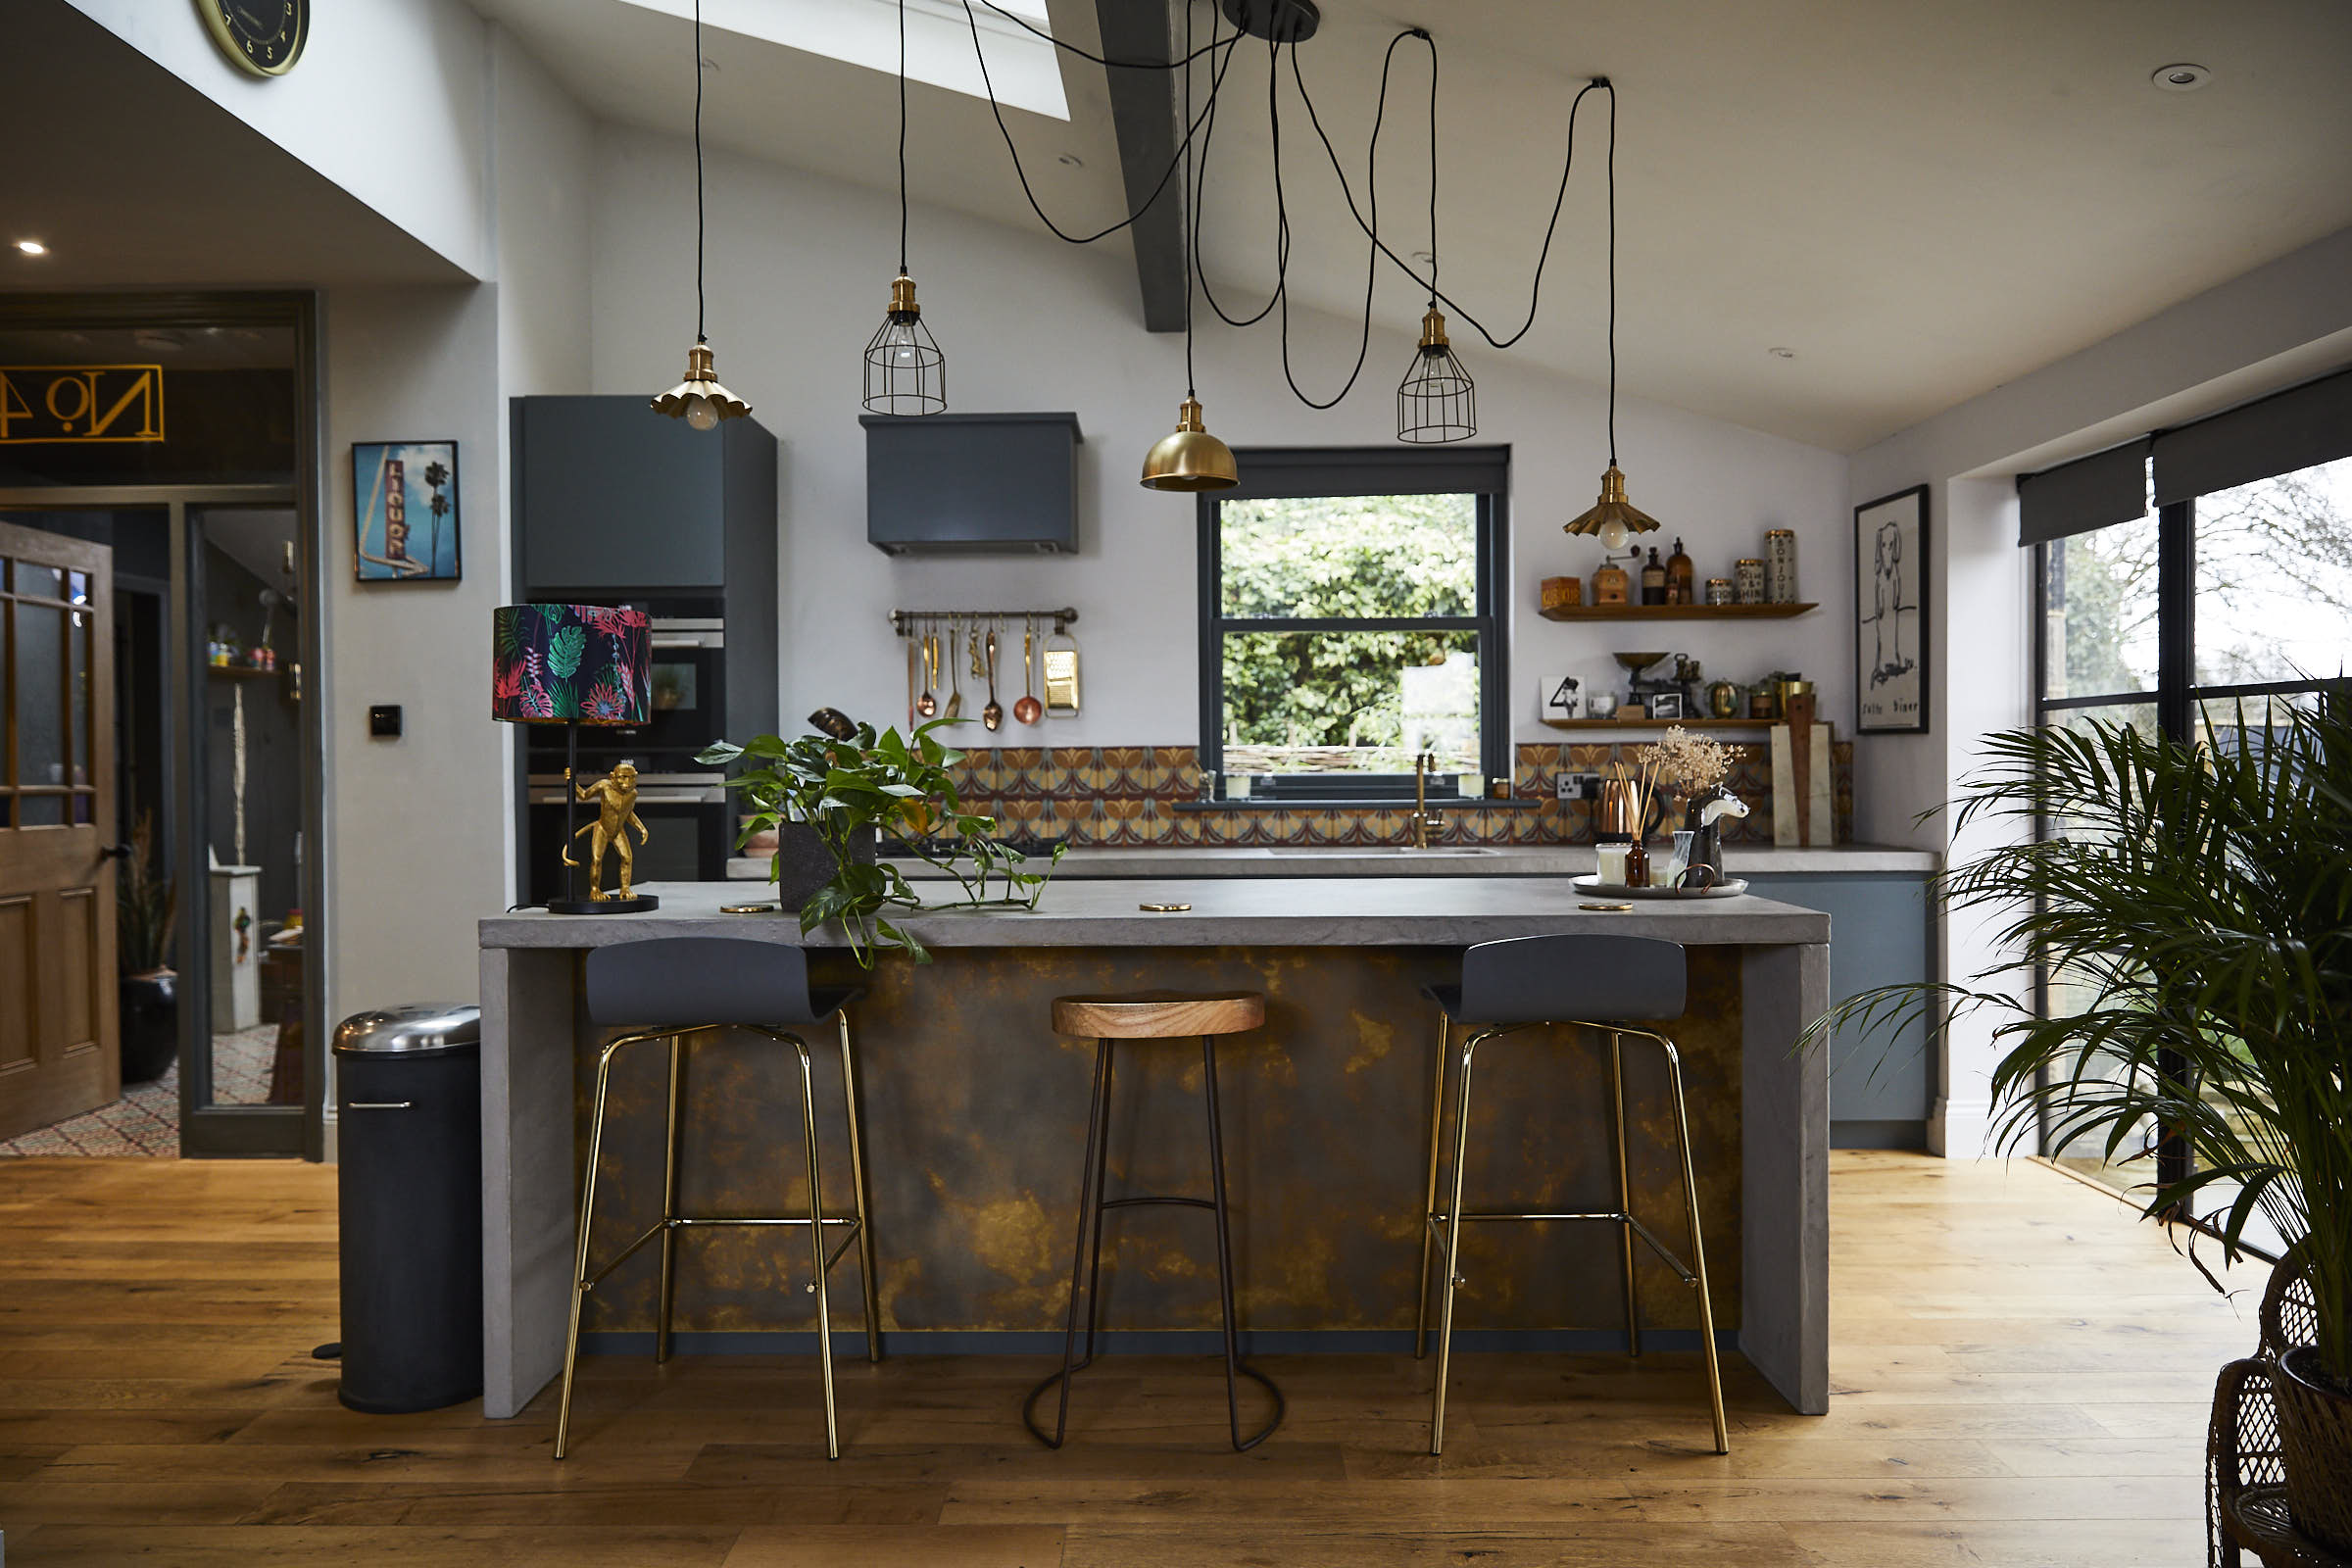 Antique brass and concrete bespoke kitchen island with bar stools